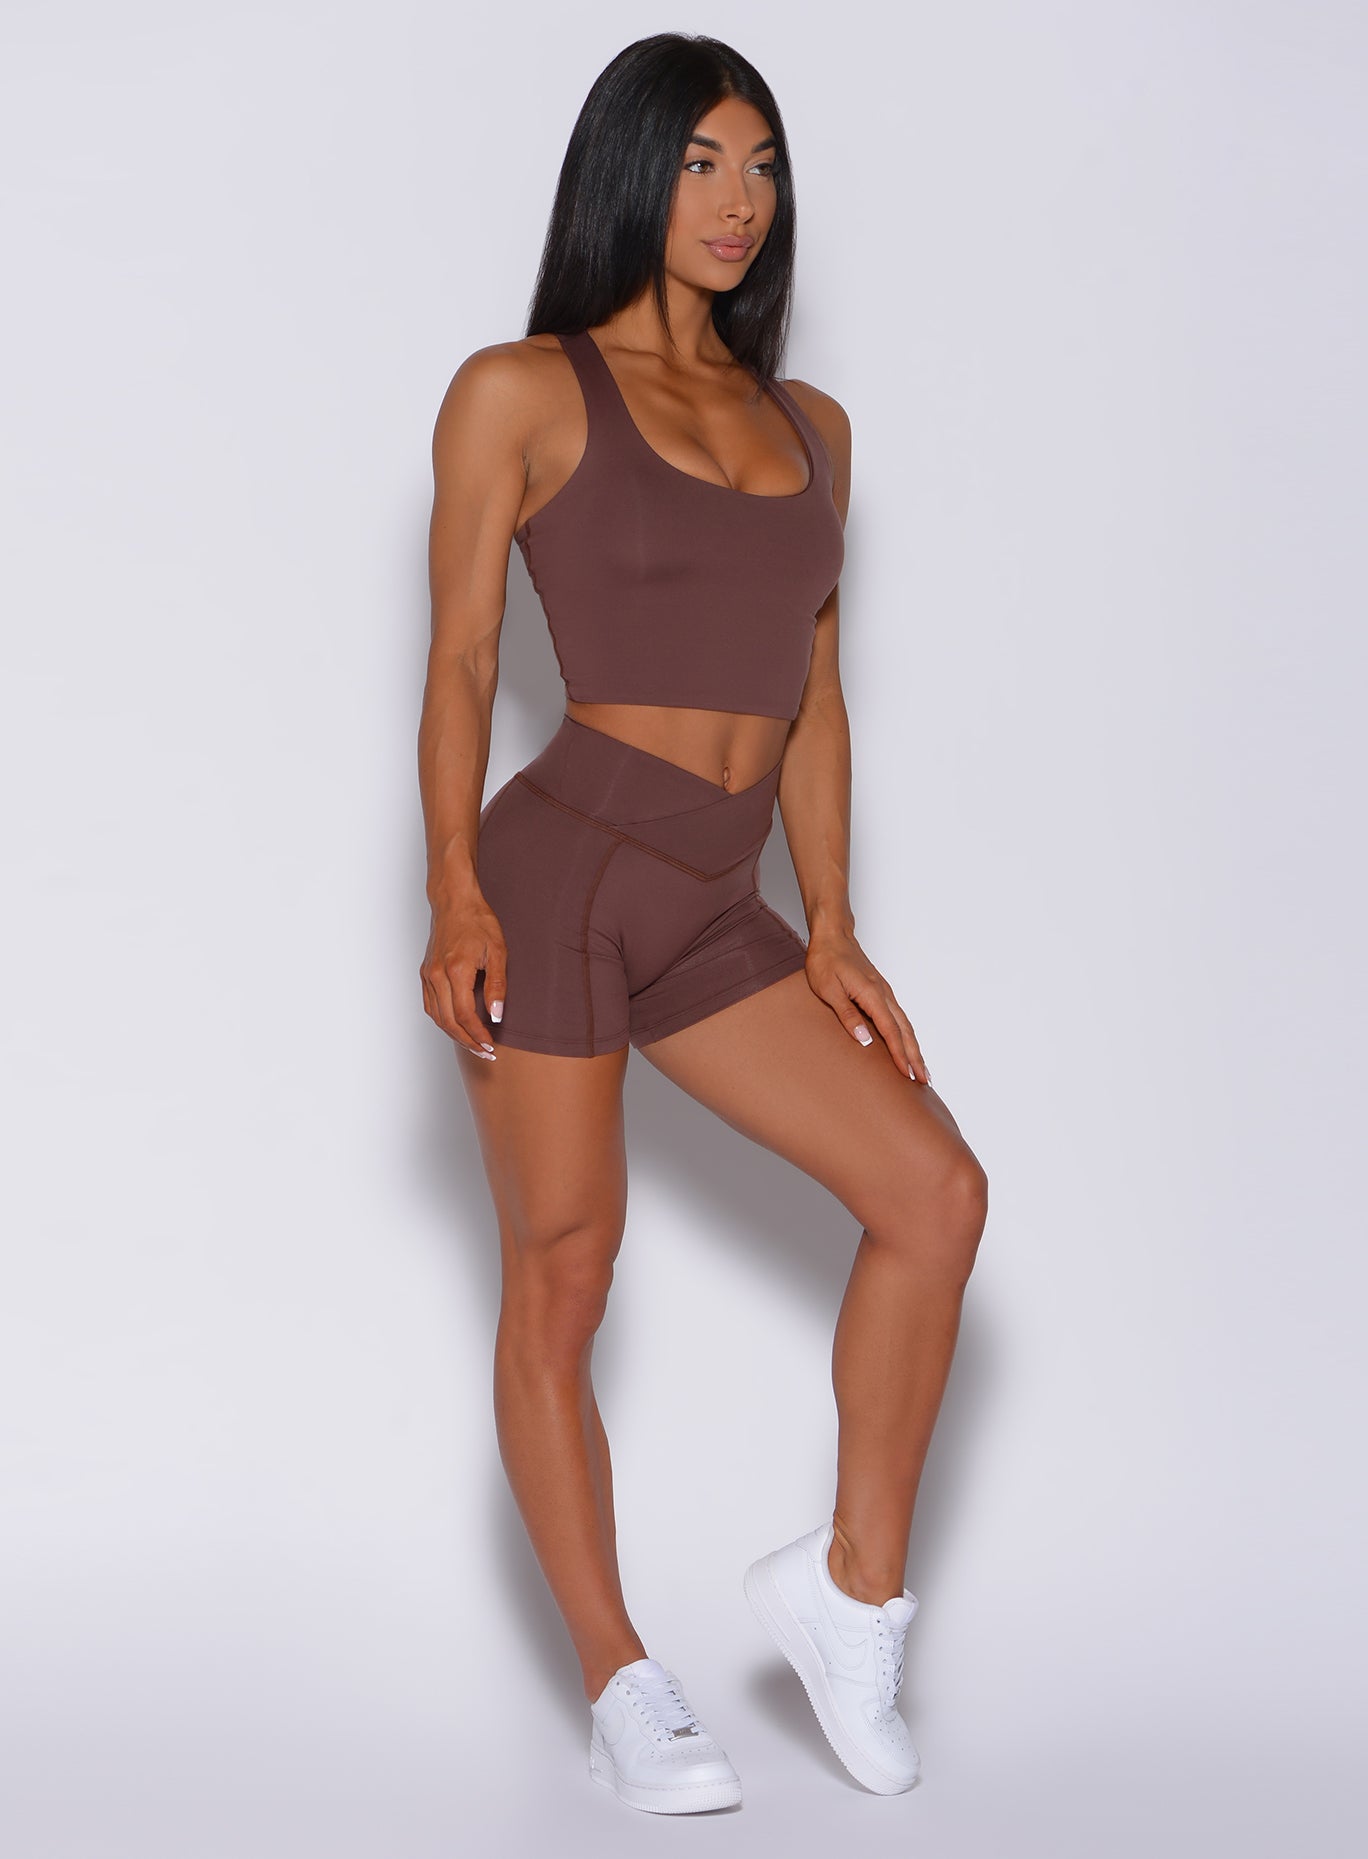 Right side profile view of a model angled right wearing our tiny waist shorts in chocolate color and a matching bra